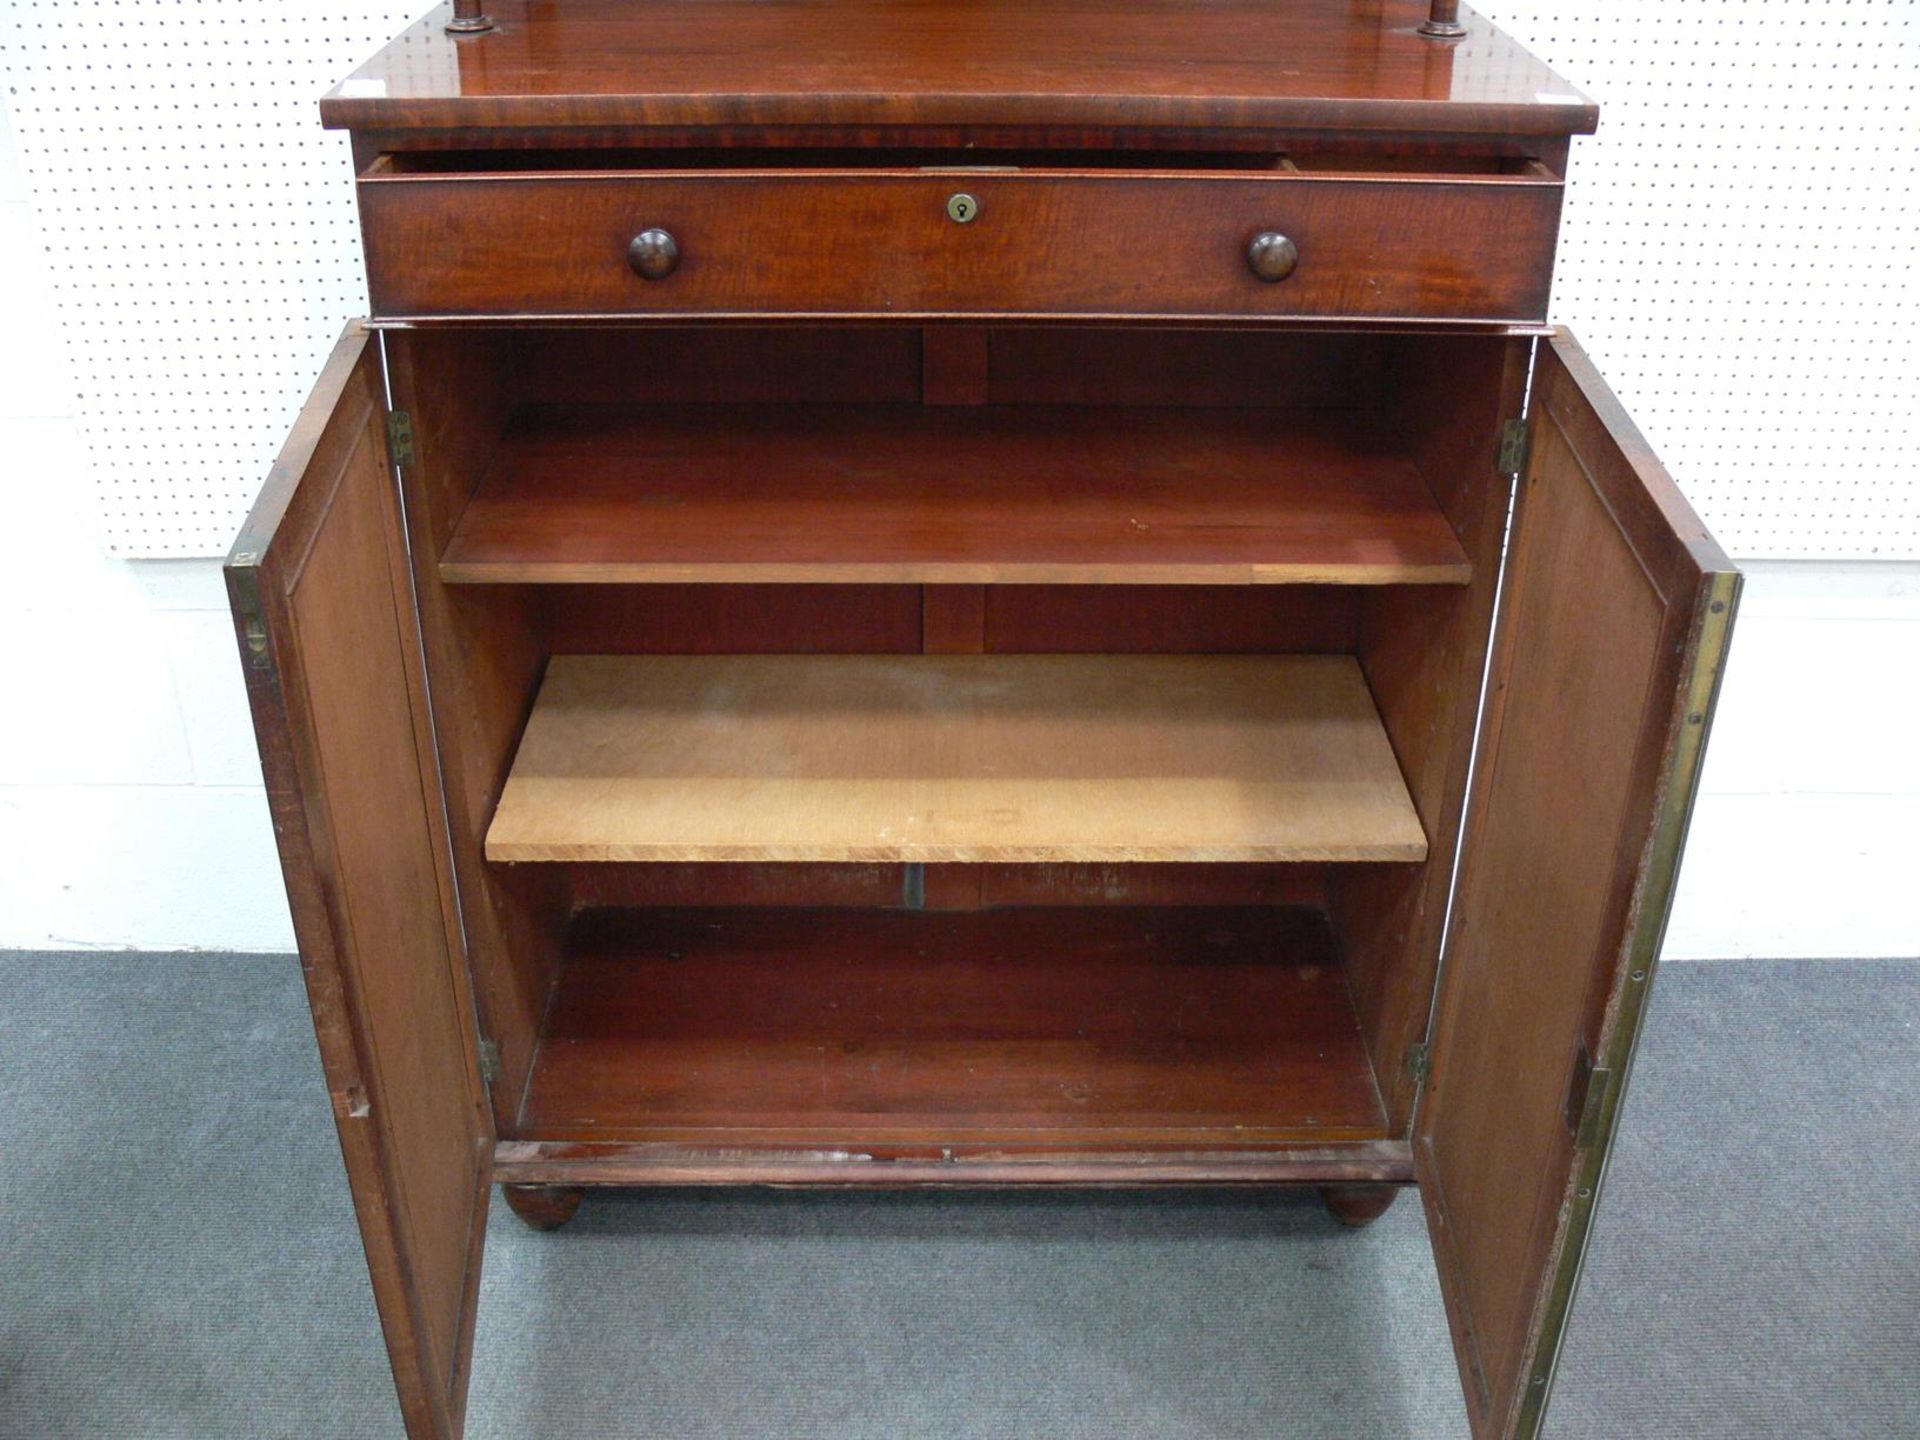 A Mahogany Antique Chiffonier with Raised Back and Two Shelves supported by Turned Columns above - Image 3 of 3